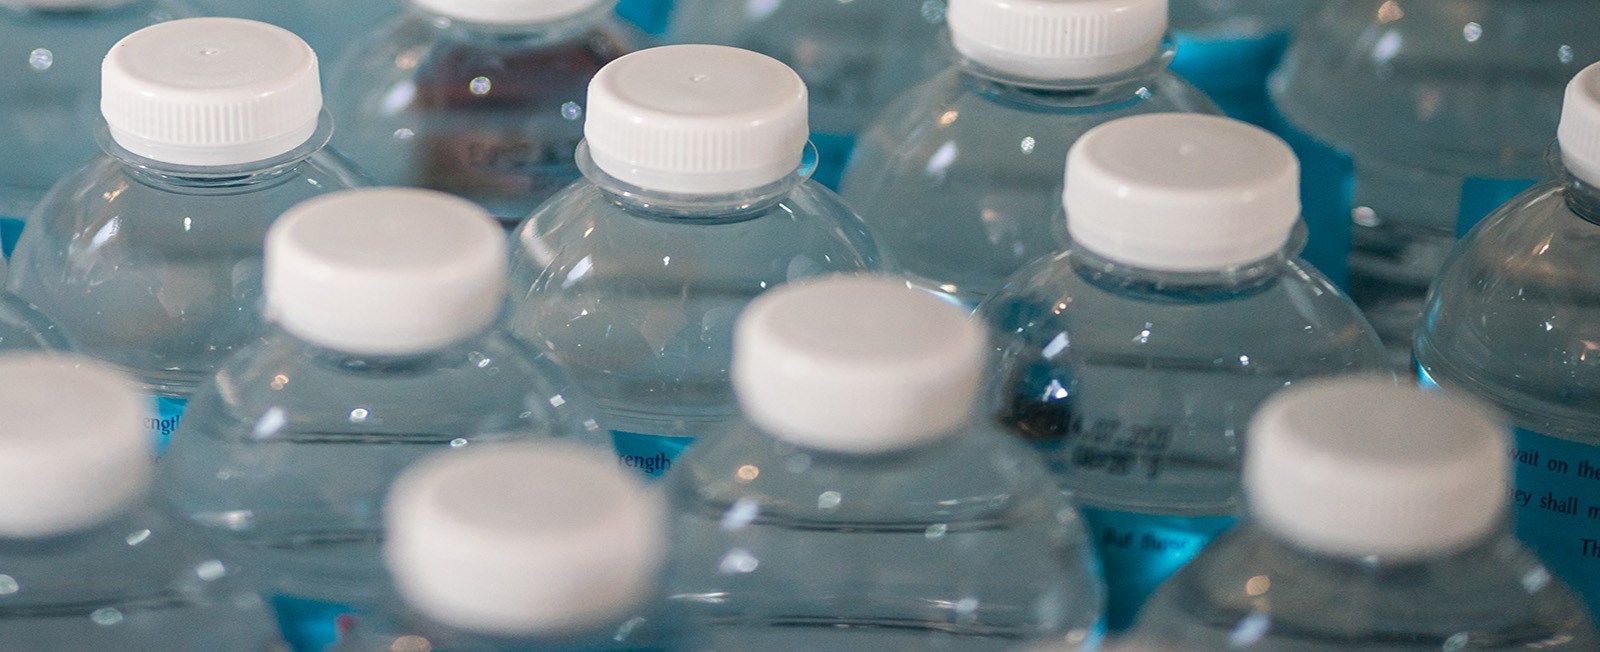 The Ban of Single-Use Plastic Water Bottles